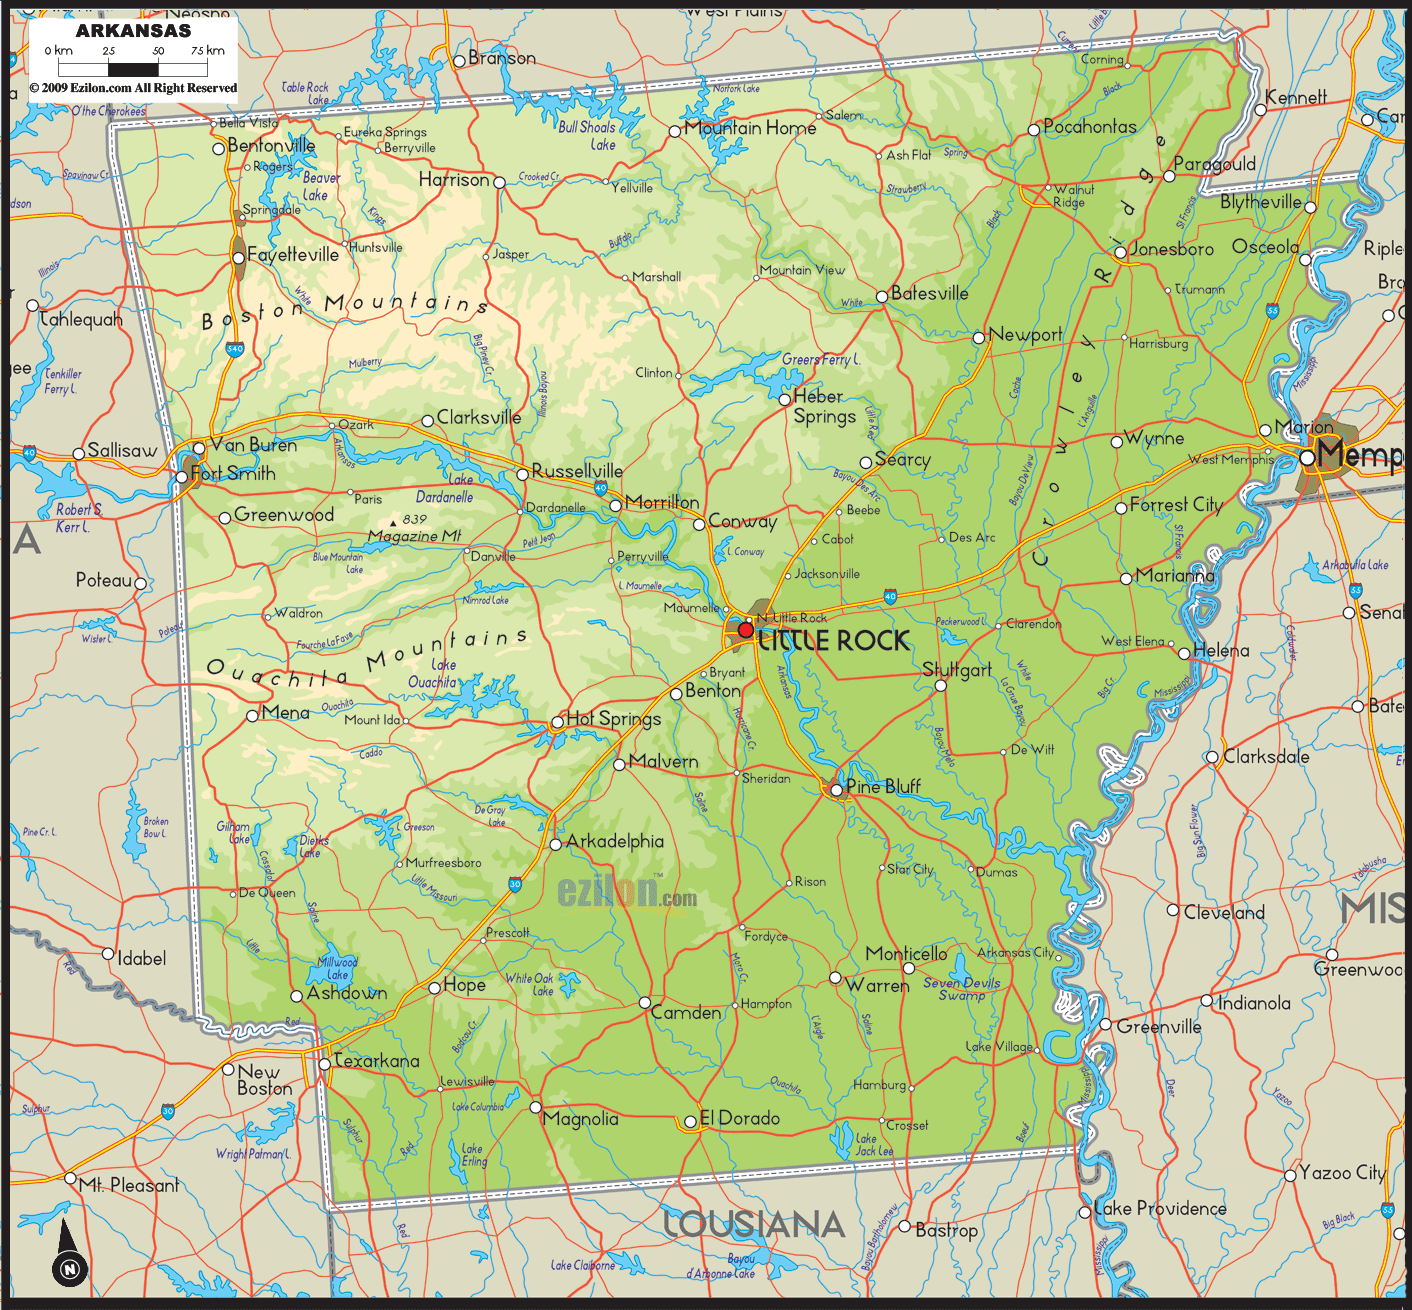 Detailed physical map of Arkansas state showing major geographical features such as rivers, lakes, mountains, topography and land formations.